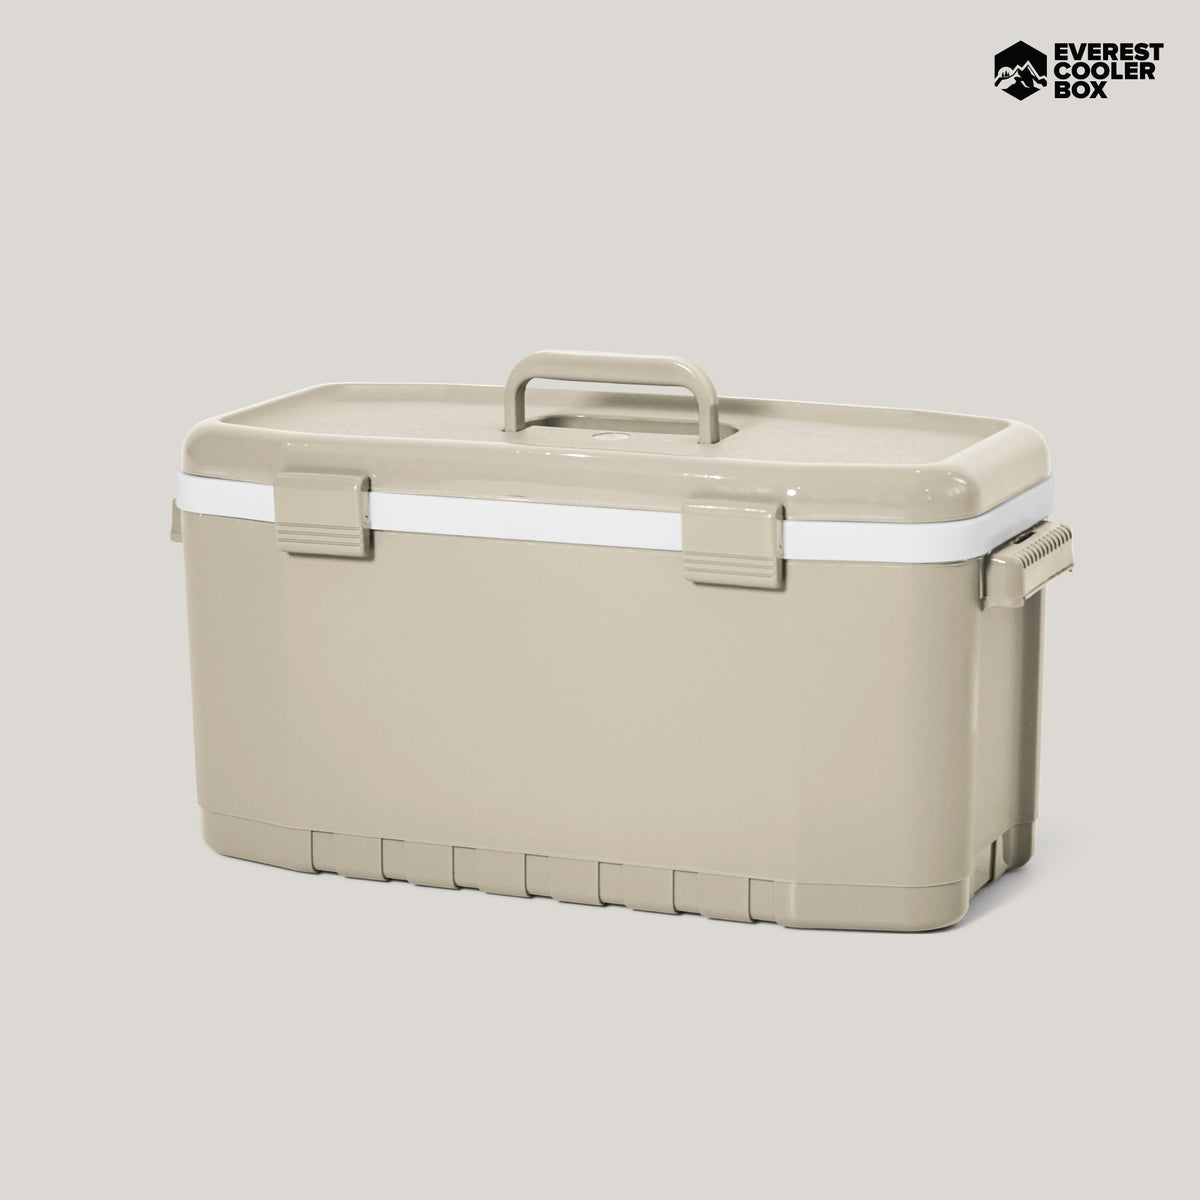 EVEREST Camping Collection Cooler Box 18 Liters AG991